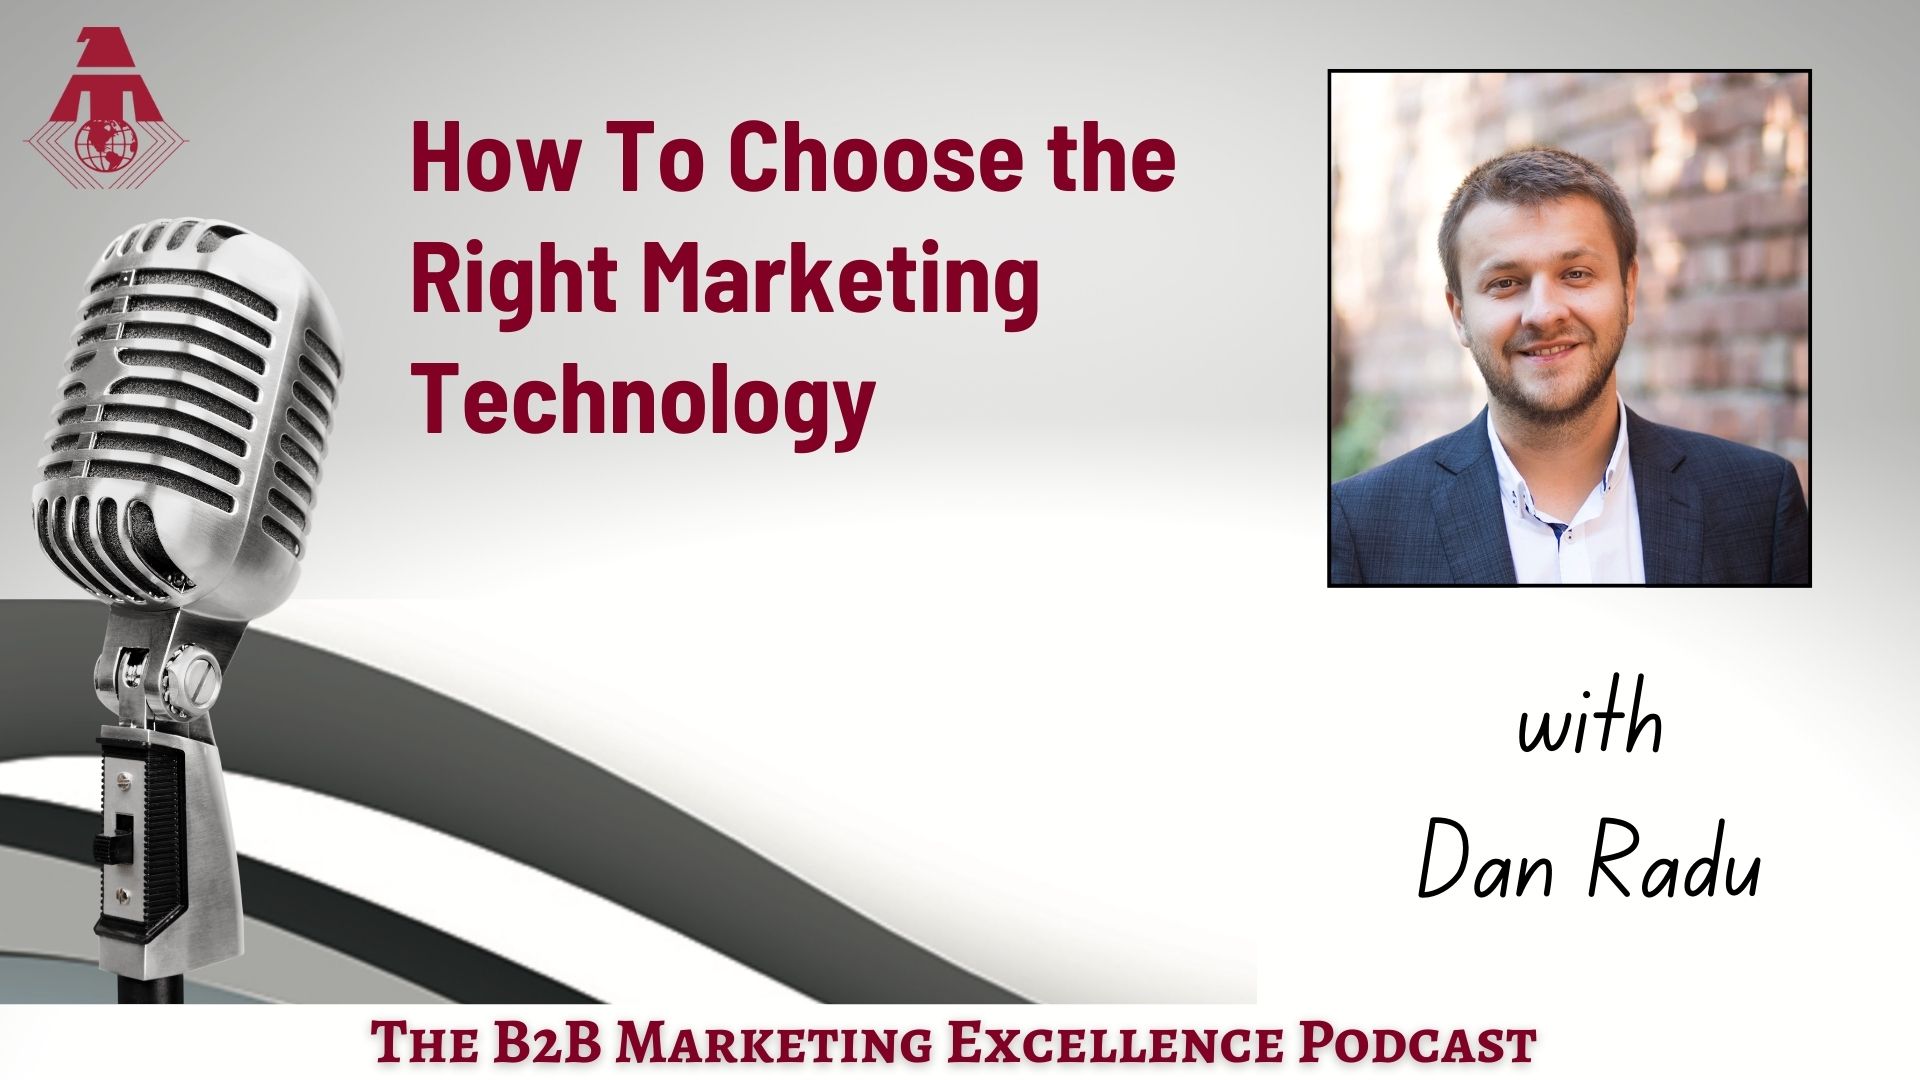 Podcast – How To Choose the Right Marketing Technology